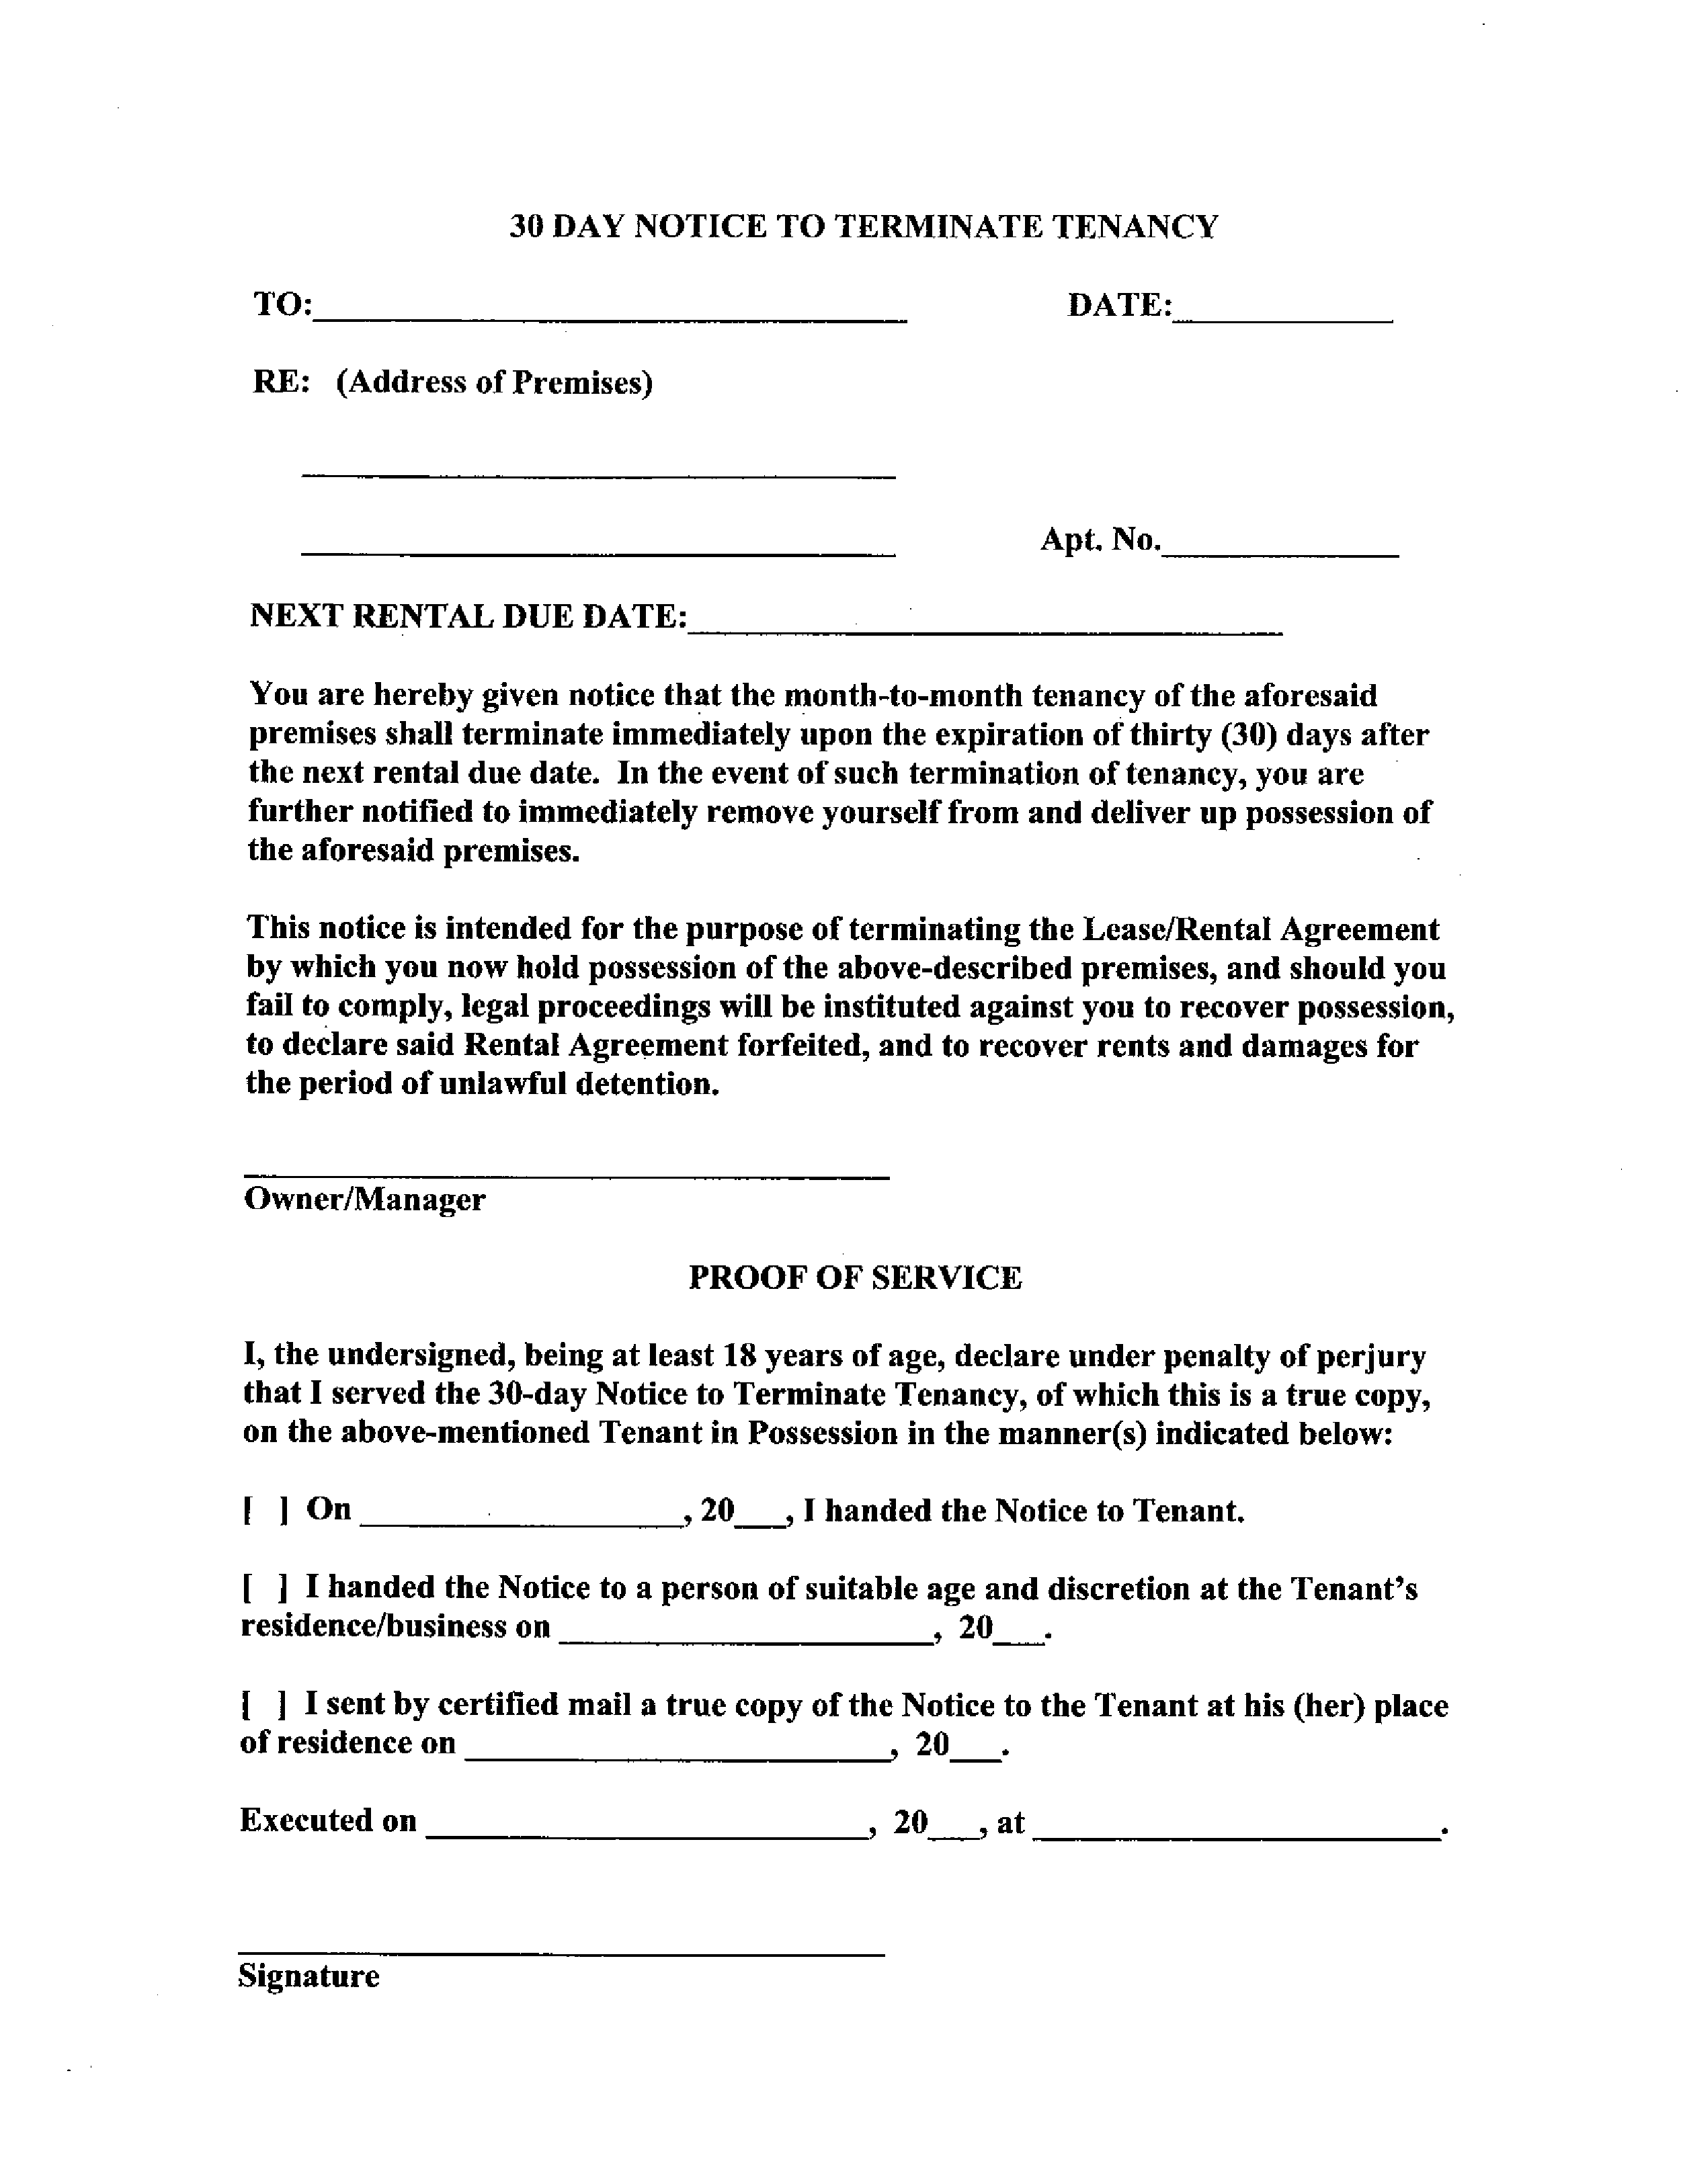 Rental 30 Day Notice Letter main image